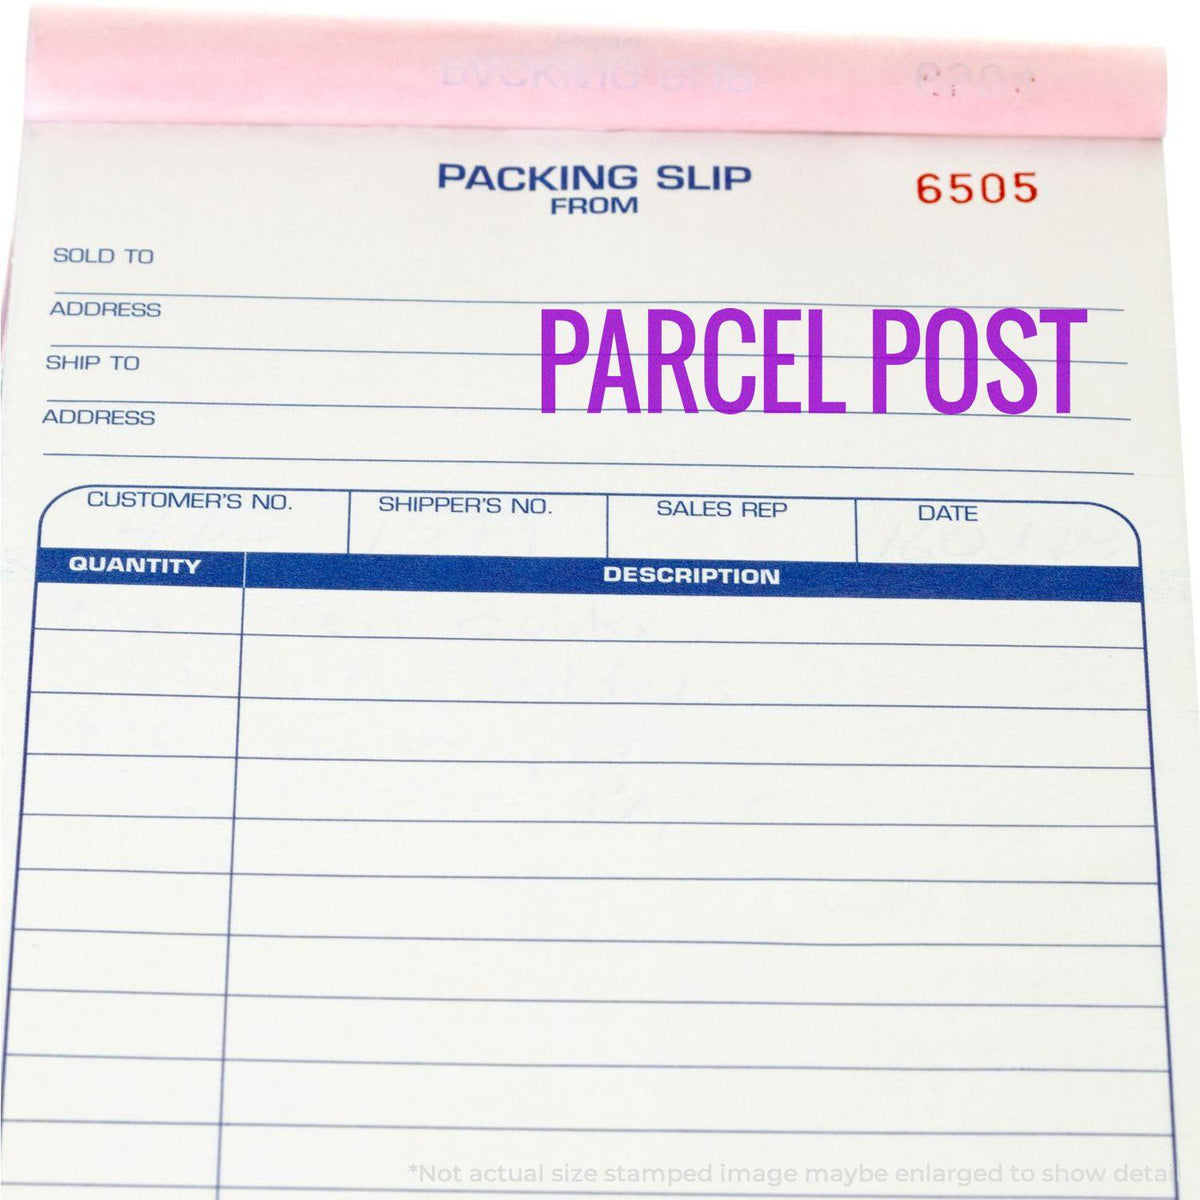 Large Parcel Post Rubber Stamp In Use Photo